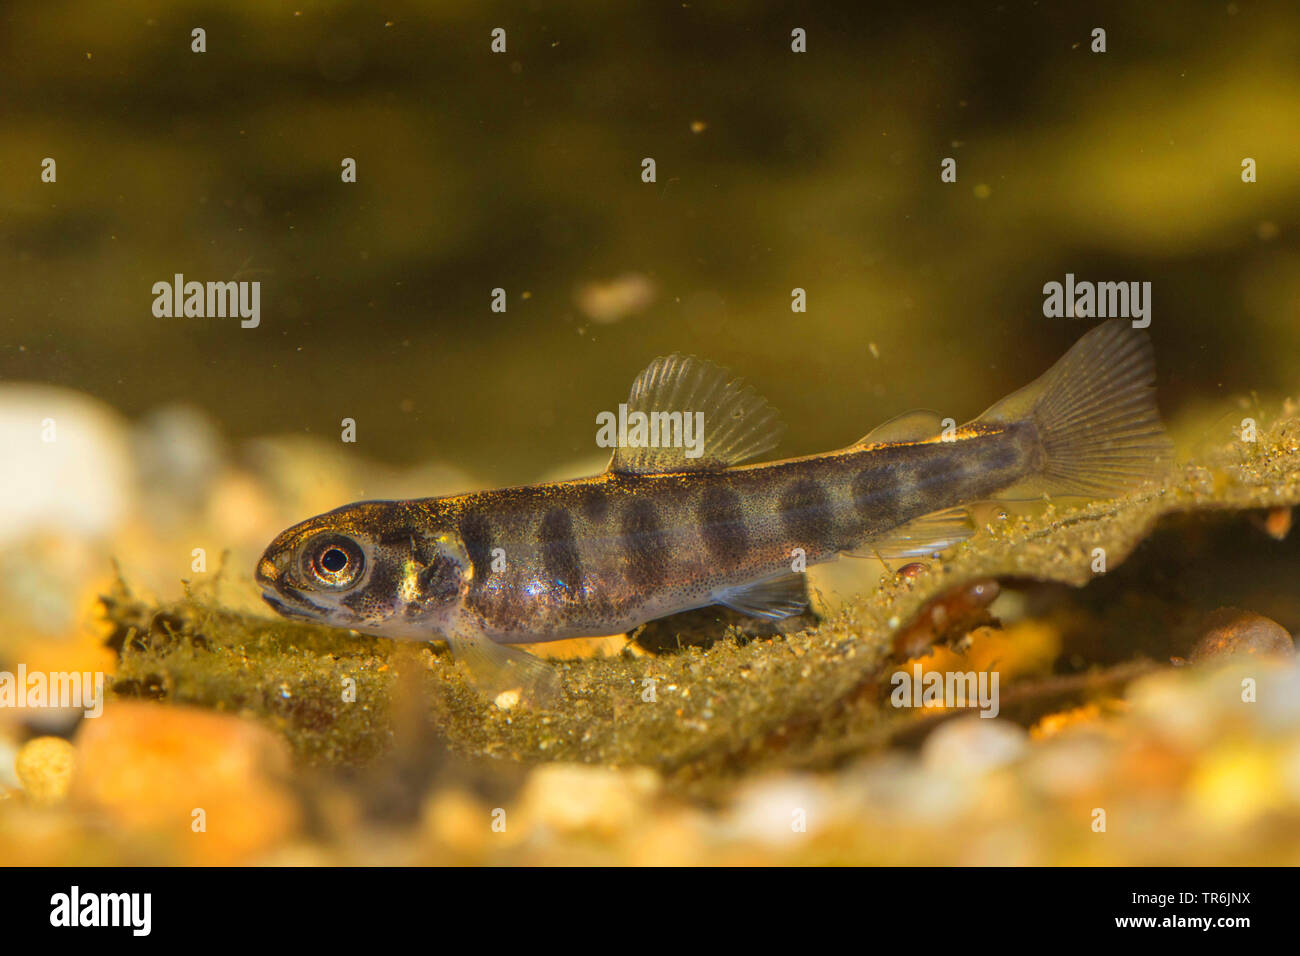 brown trout, river trout, brook trout (Salmo trutta fario), lateral view, Germany Stock Photo